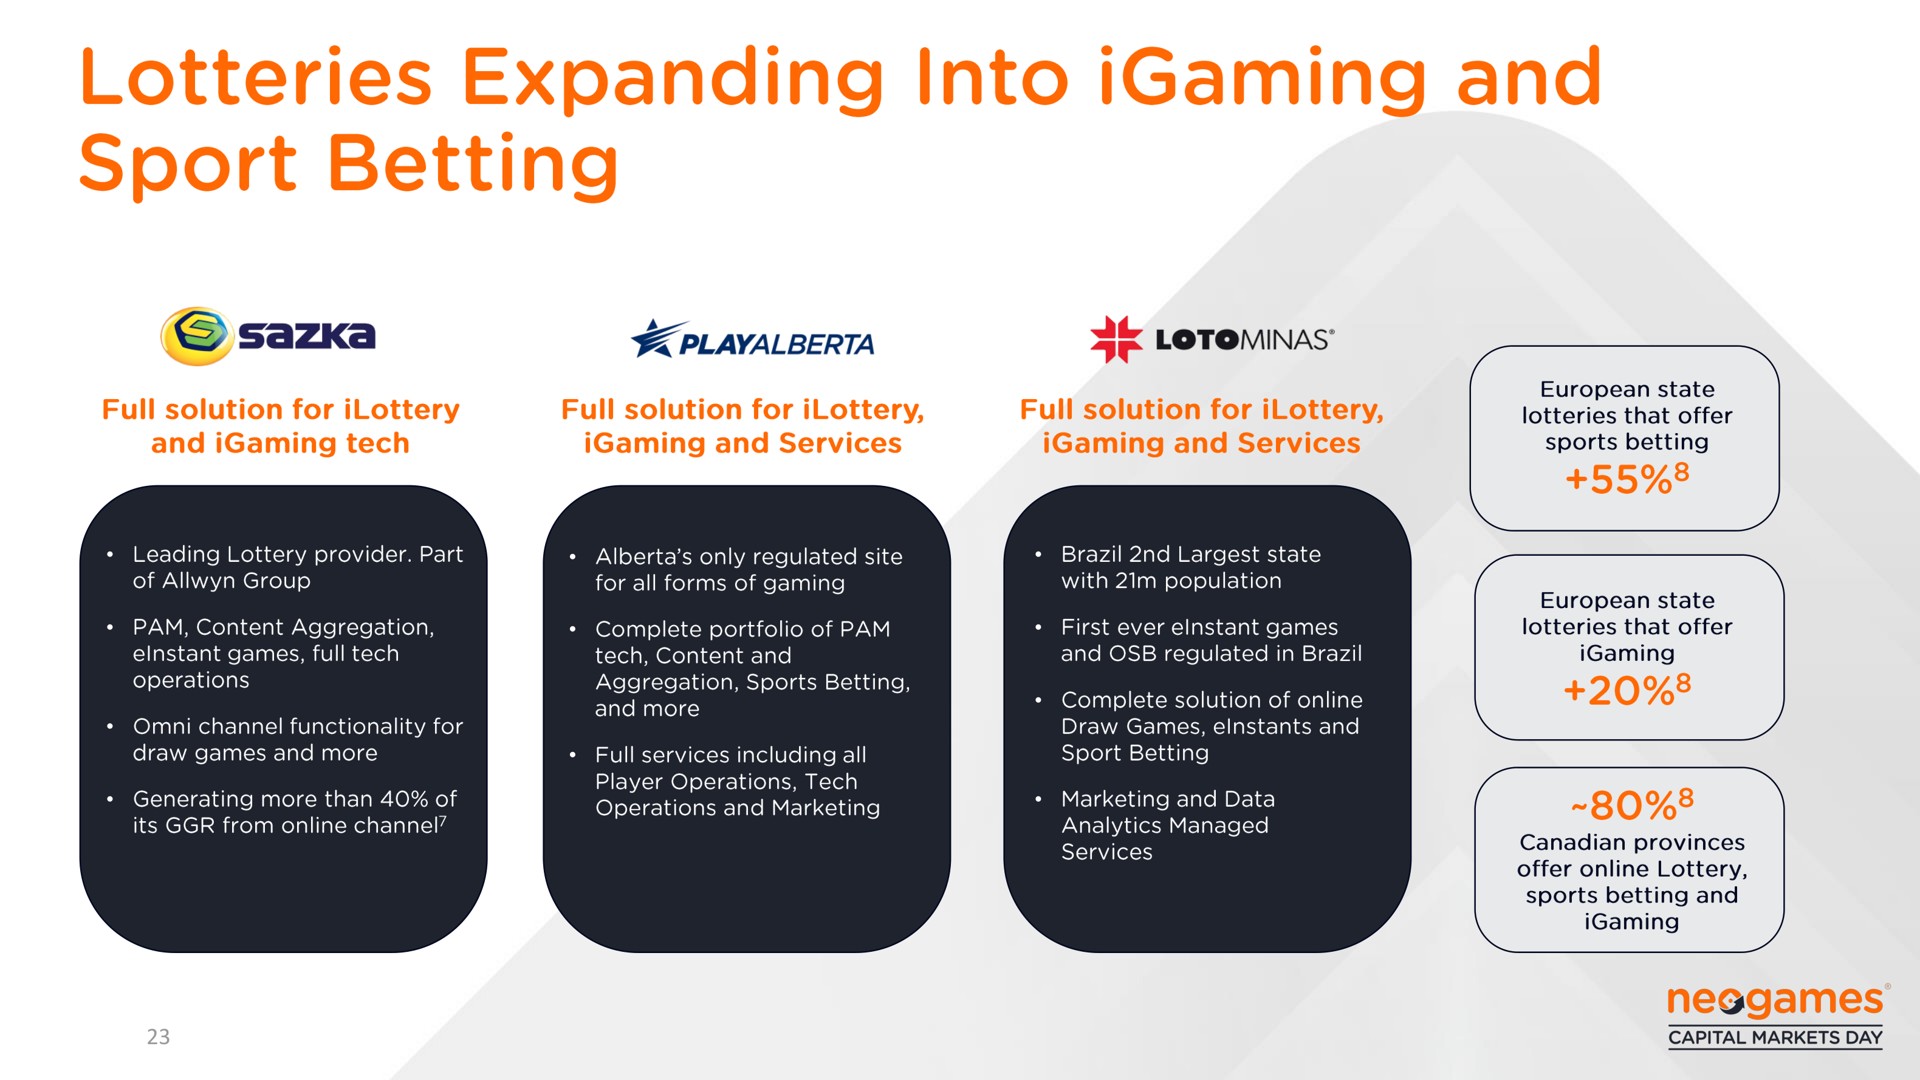 lotteries expanding into and sport betting | Neogames